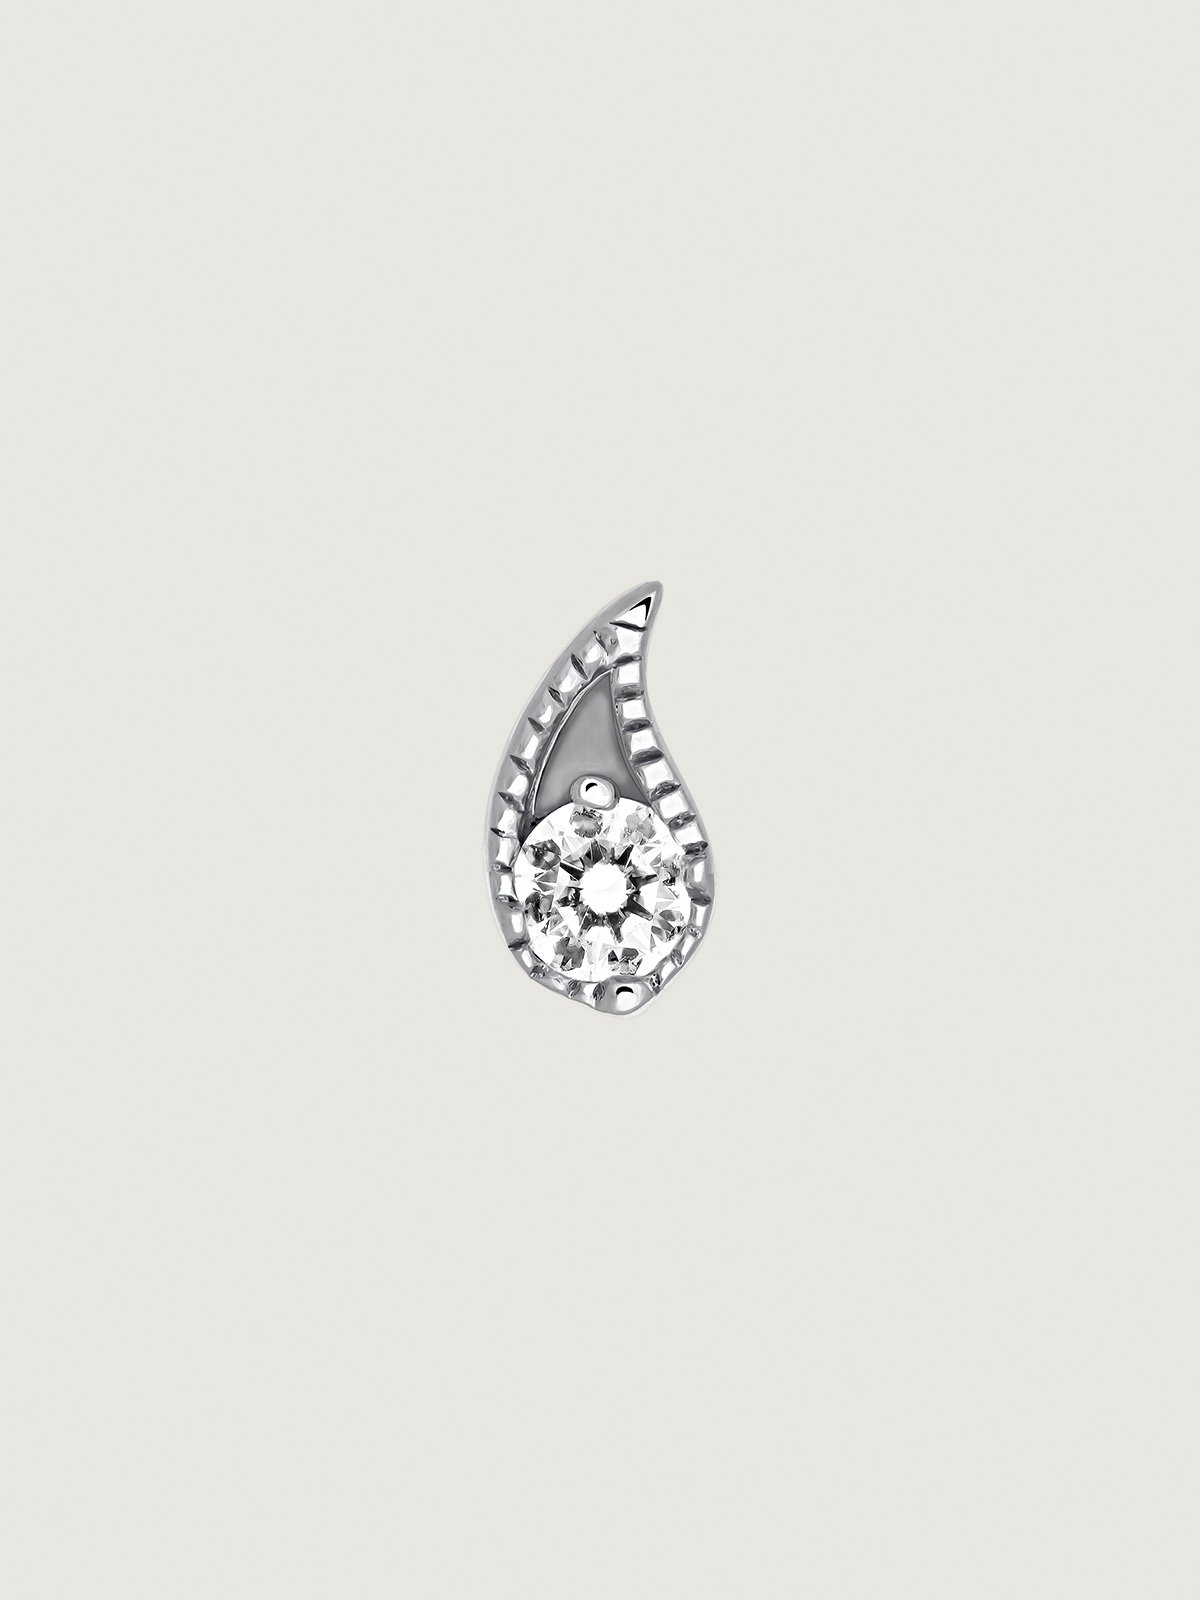 9K white gold piercing with diamonds and teardrop shape.